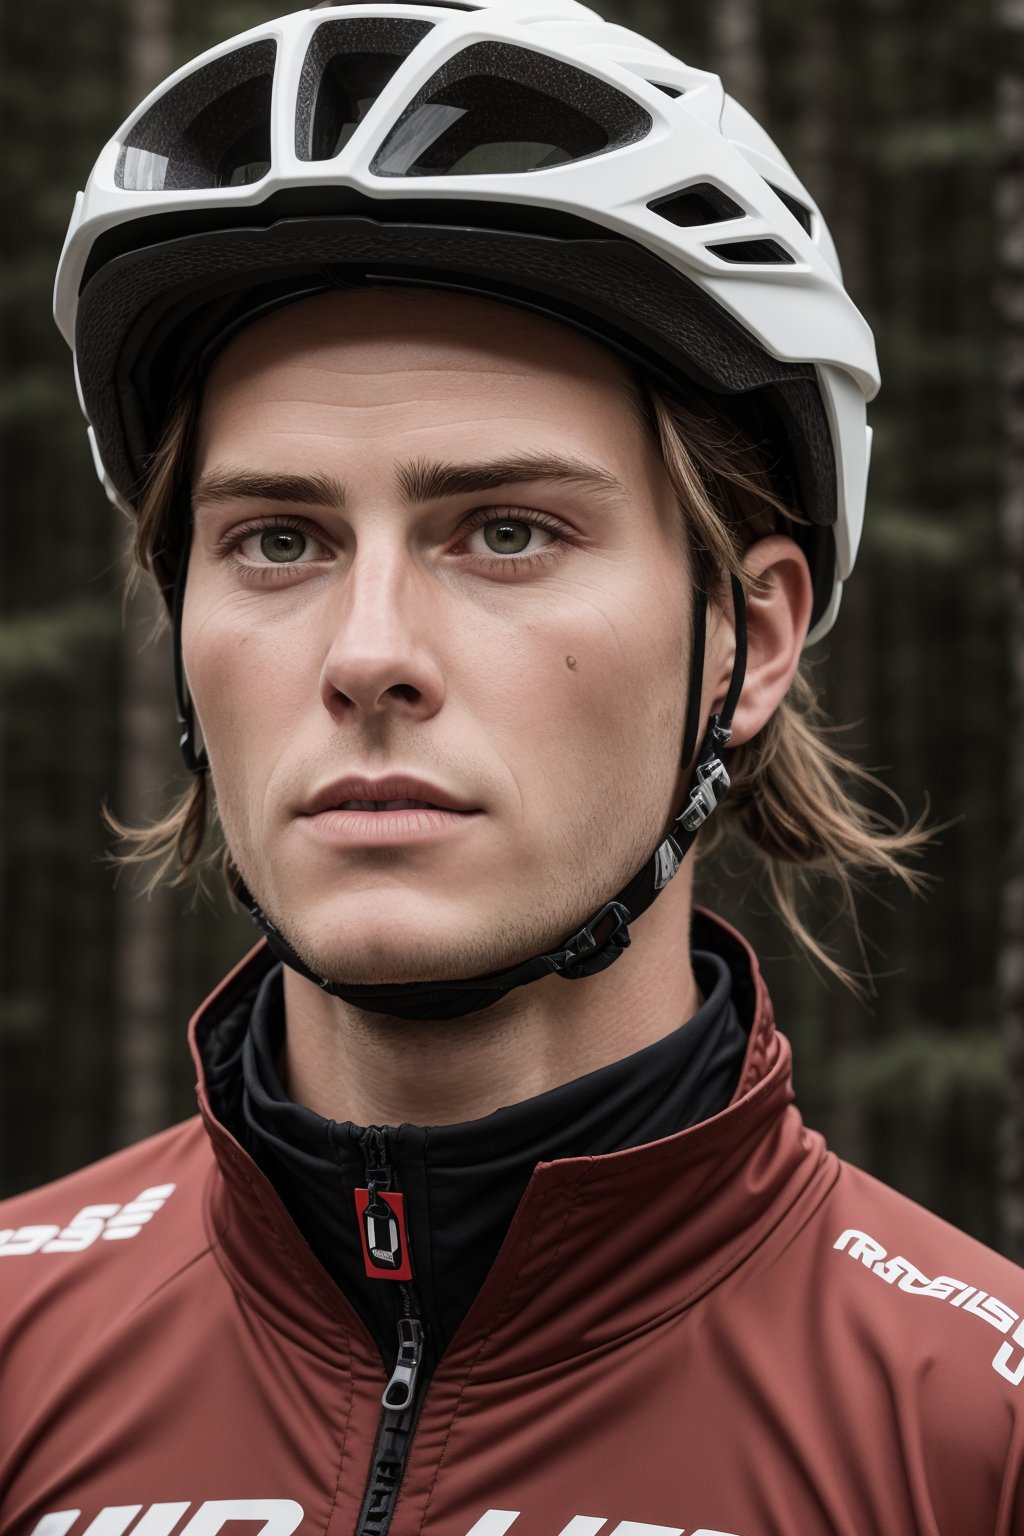 (best quality, masterpiece, ultra quality), UHD quality, rule of thirds, 1 man Loïc Bruni is a French athlete who competes in mountain biking in the downhill discipline. He won five gold medals in the World Mountain Bike Championships, between the years 2015 and 2022.
The character should have detailed skin texture, well-defined hands, reflect realism. Her face should show symmetry in her physical features and should have a serious but friendly expression. Eyes, realistic eyeballs, symmetrical eyeballs, small eyeballs.
